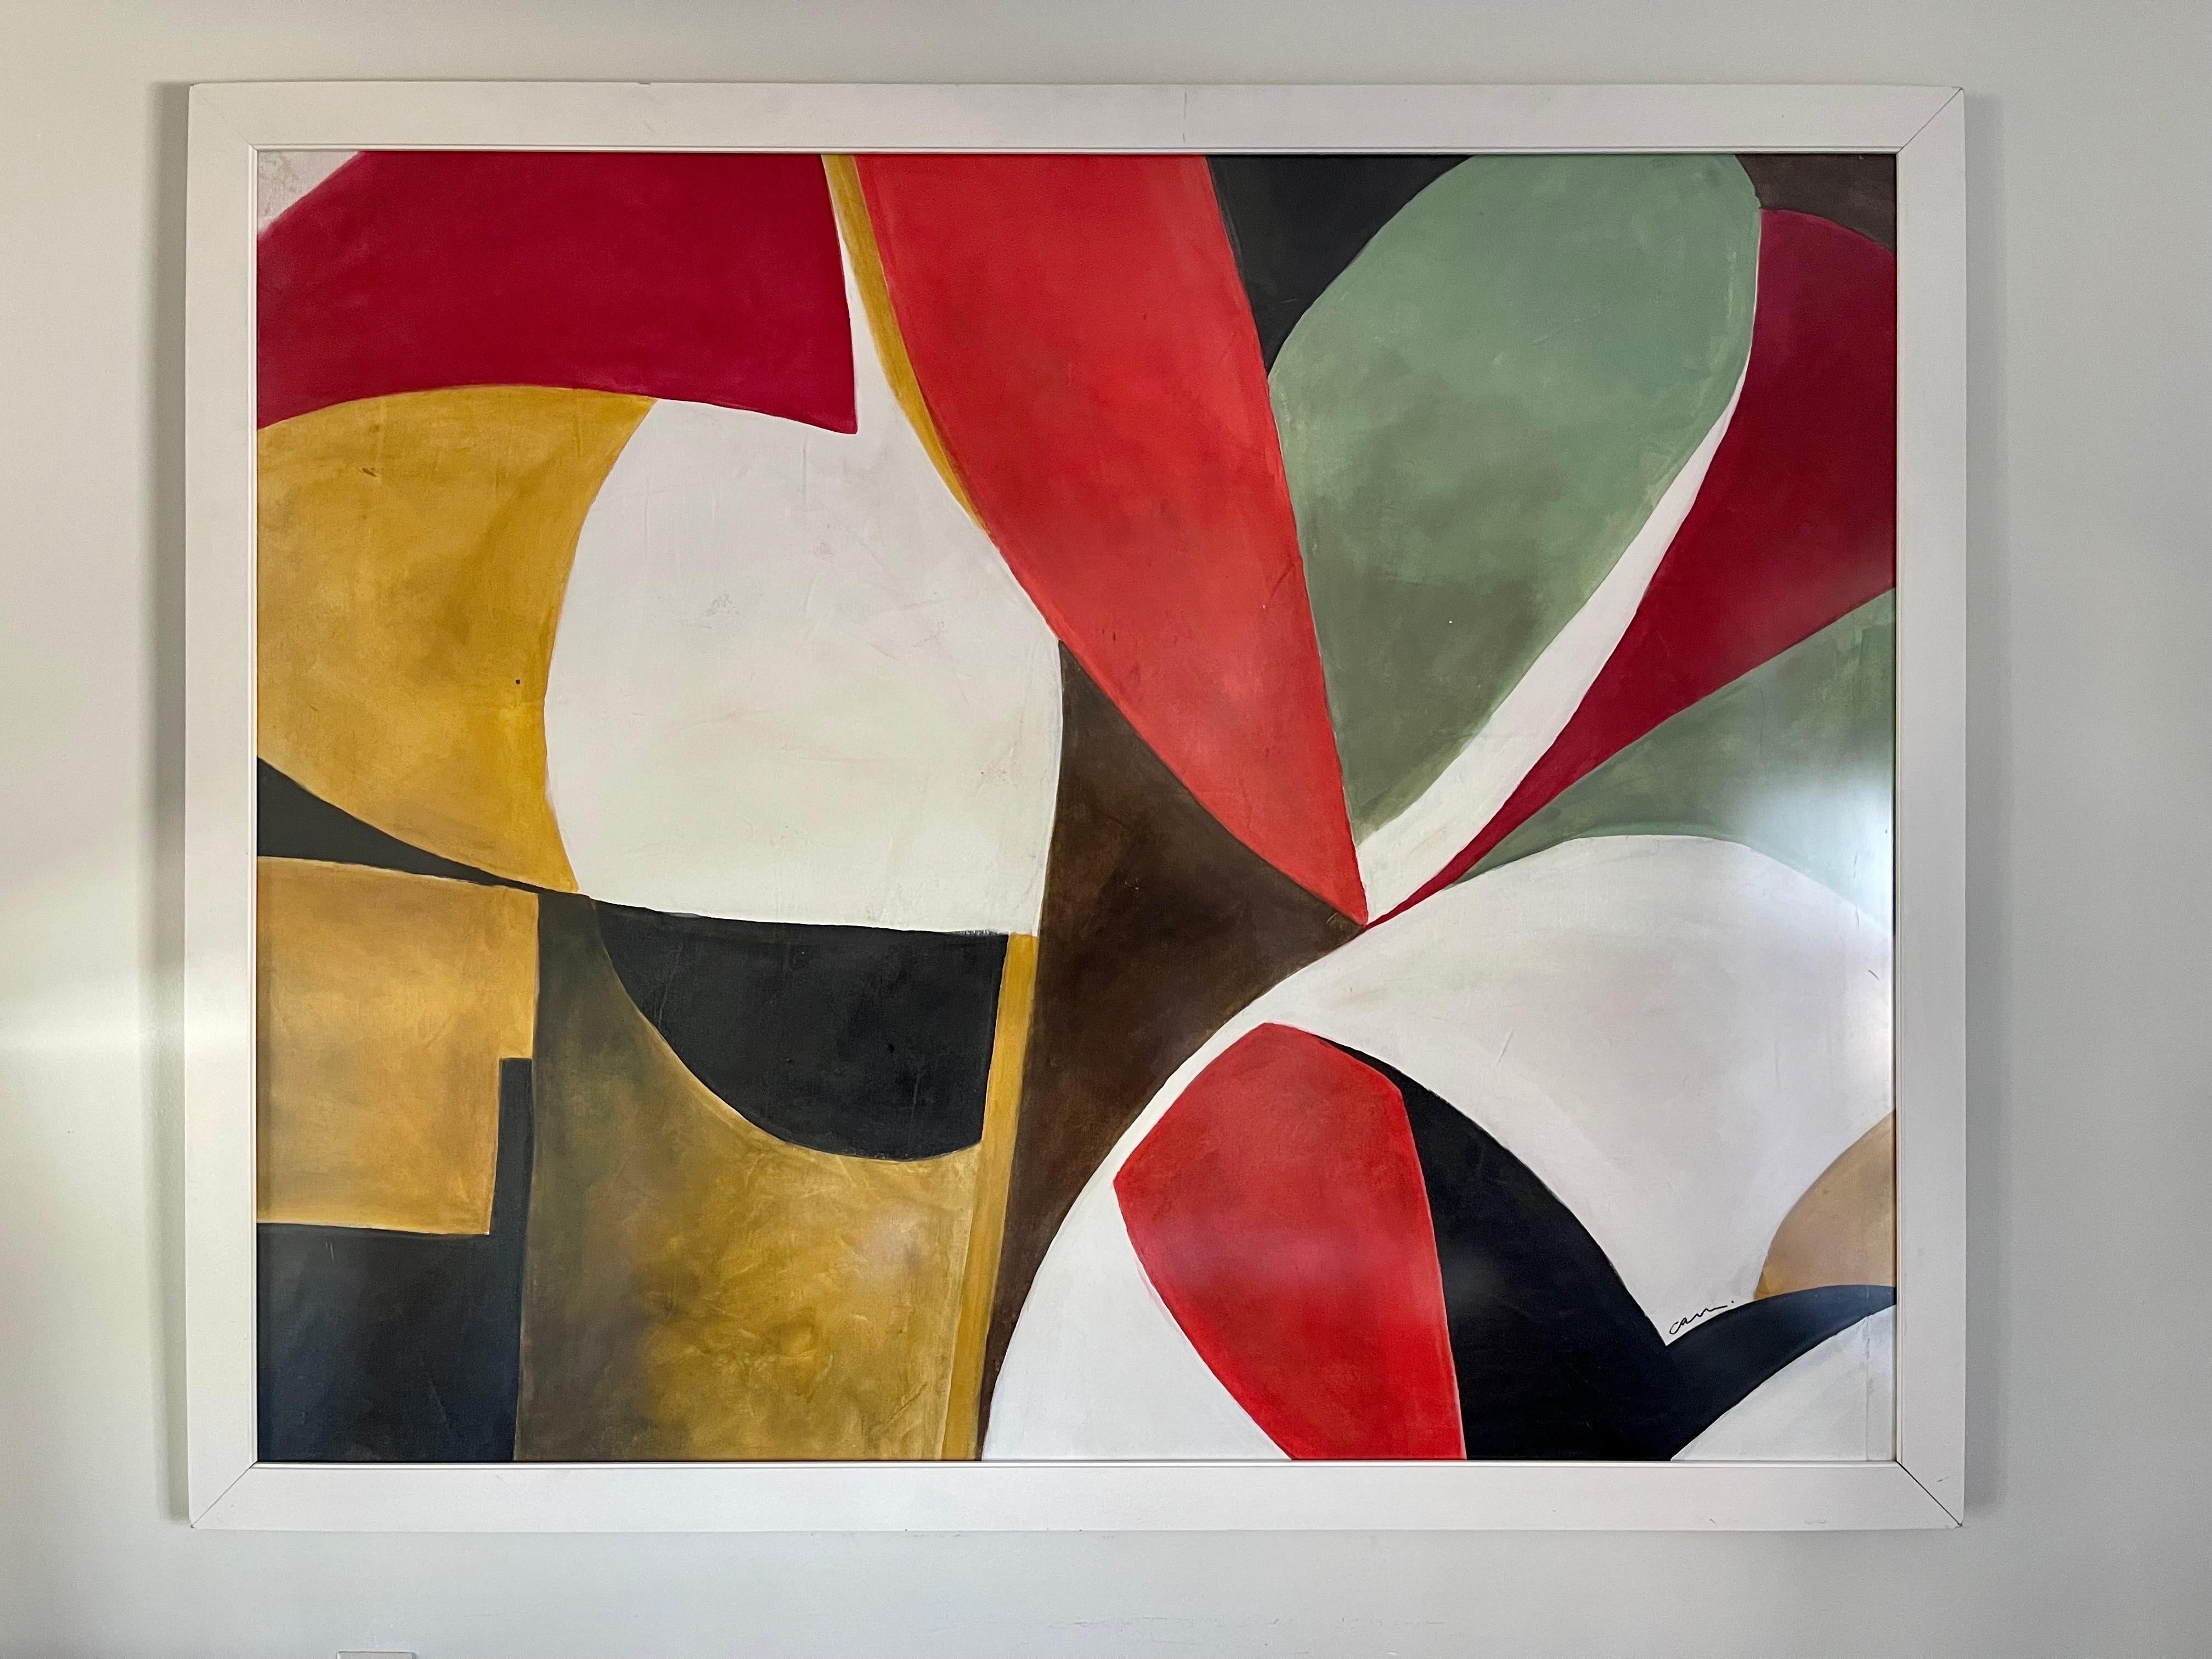 Abstract original signed painting by American contemporary artist Arlene Carr. Signed at lower right. Displayed in a modern white frame. This is an extra large piece measuring 65 inches wide by 54 inches tall and will set any room apart.
A